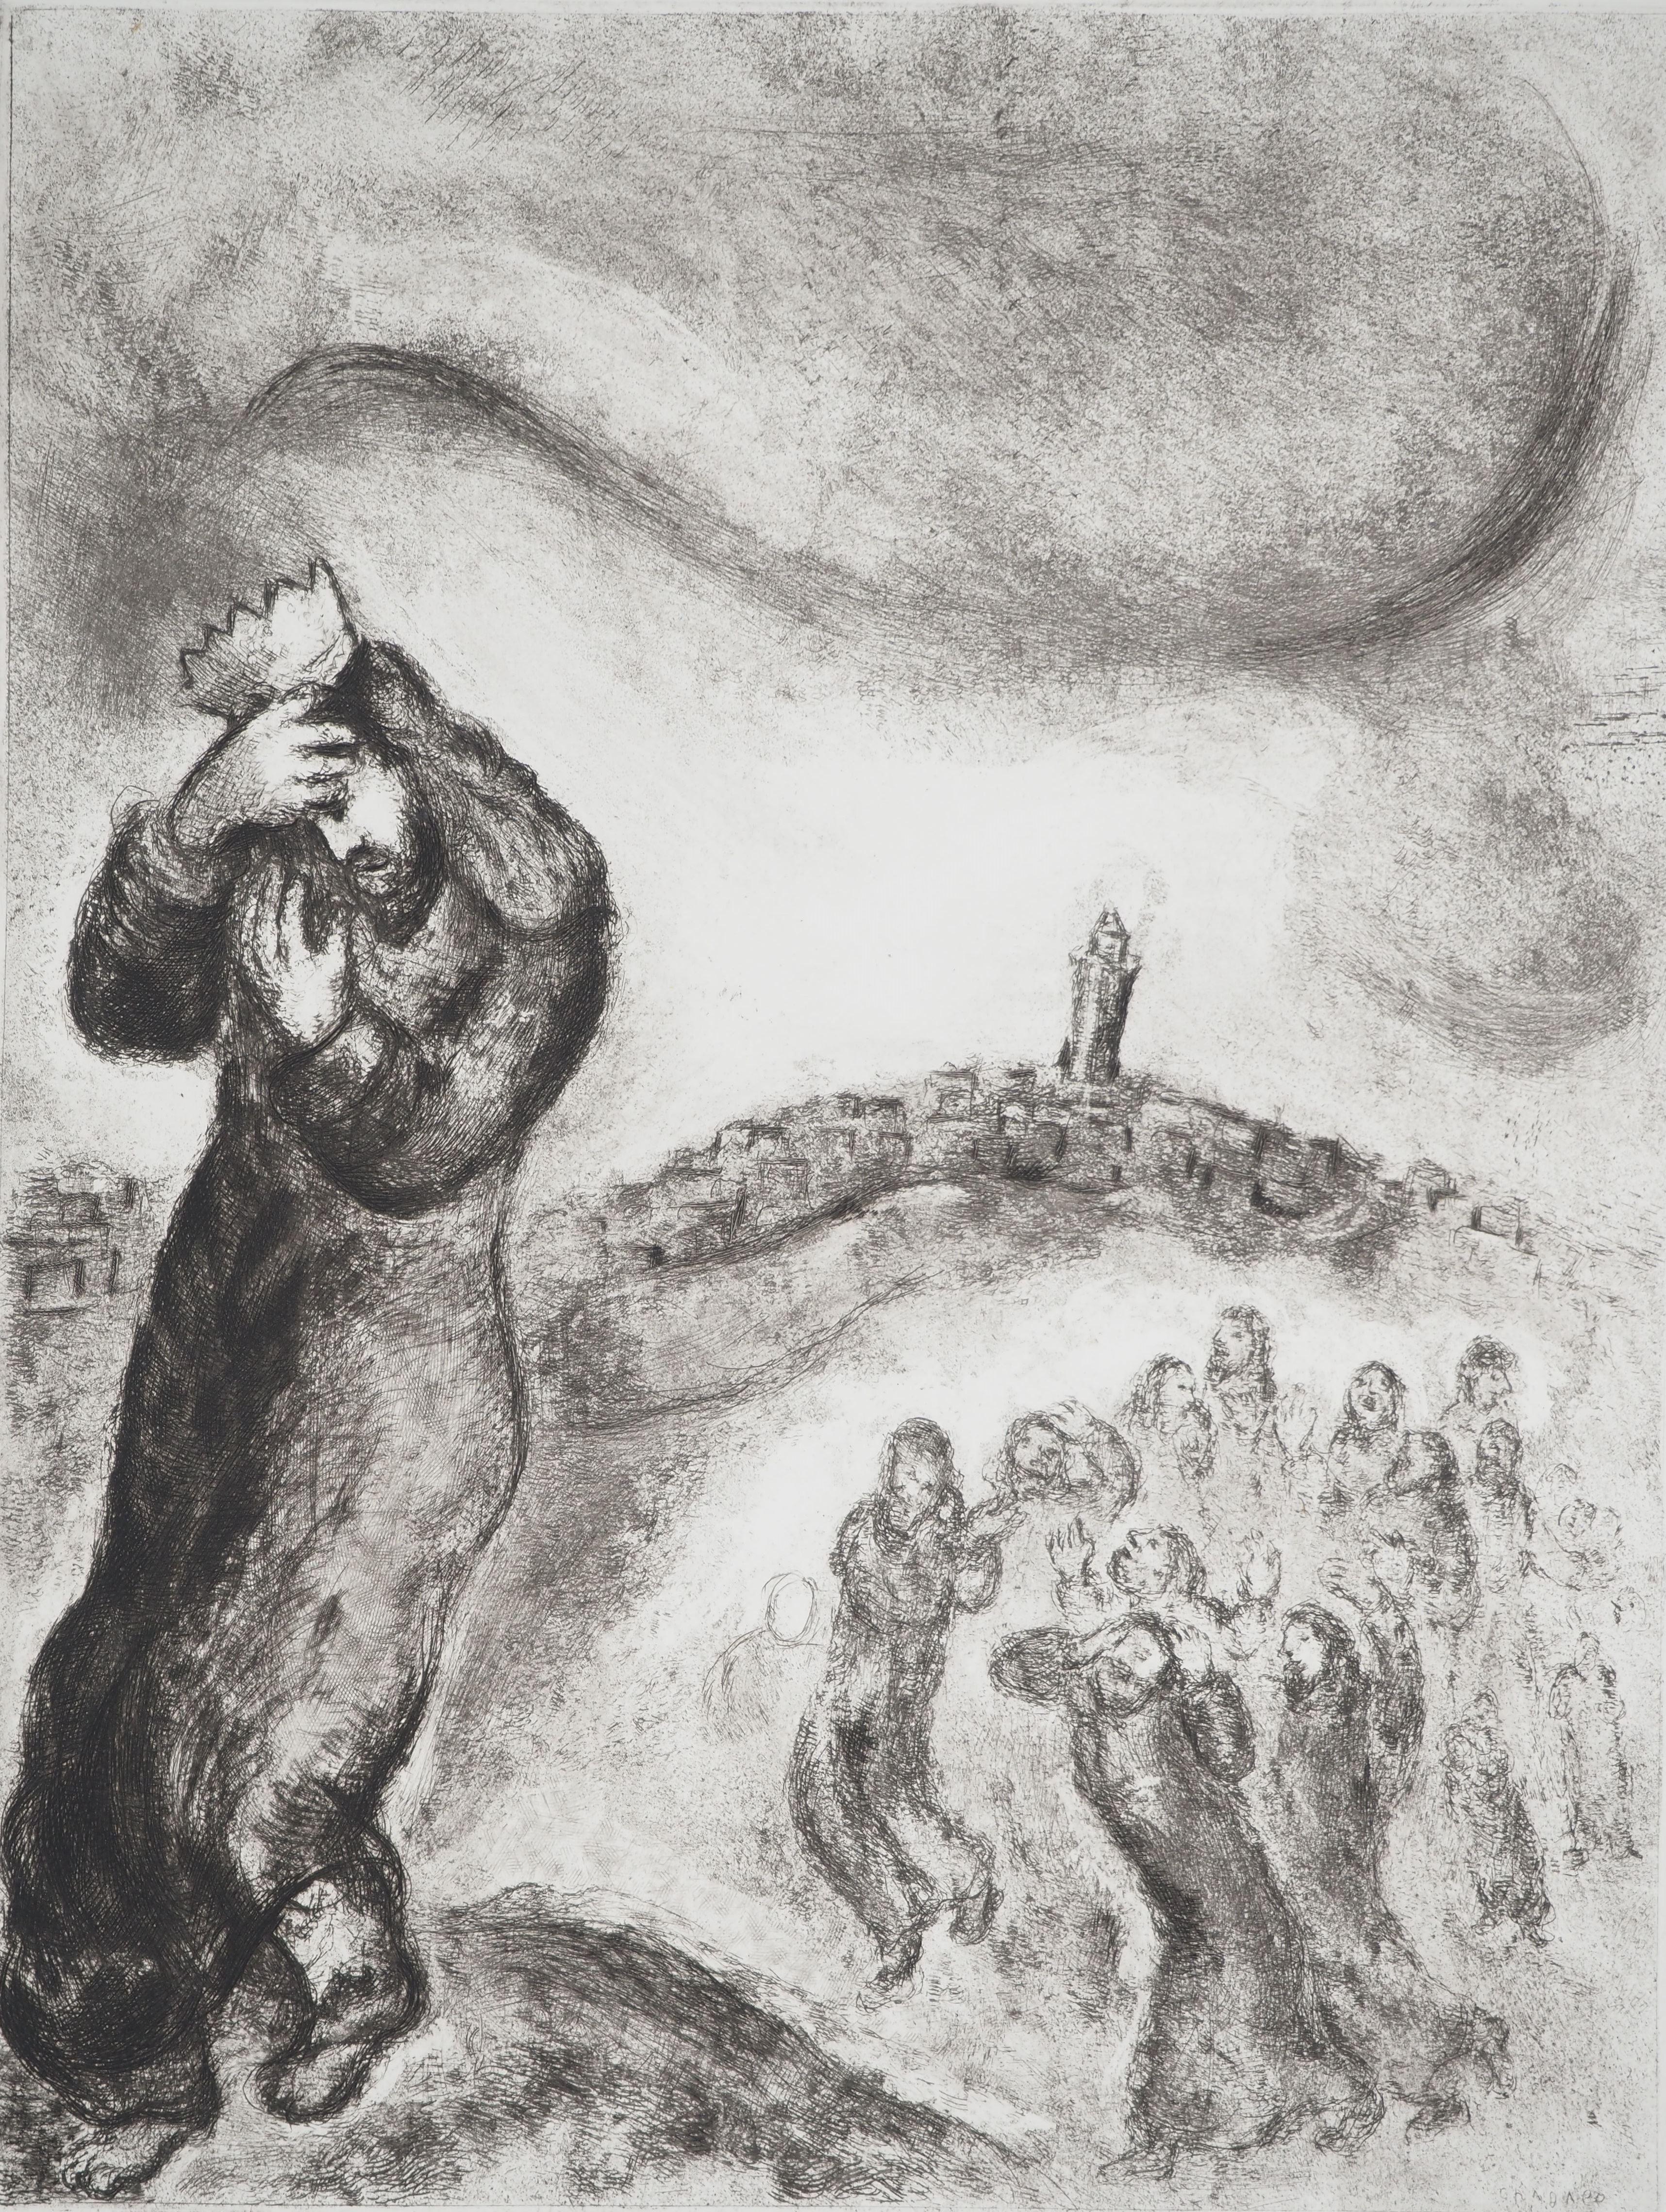 Marc Chagall (1887-1958)
Bible : David ascending the hill of olives (David montant la colline des oliviers), 1939

Original etching
Printed signature in the plate
On Montval vellum, 44 x 33.5 cm (c. 17.3 x 13.1 inch)

INFORMATION: Published by